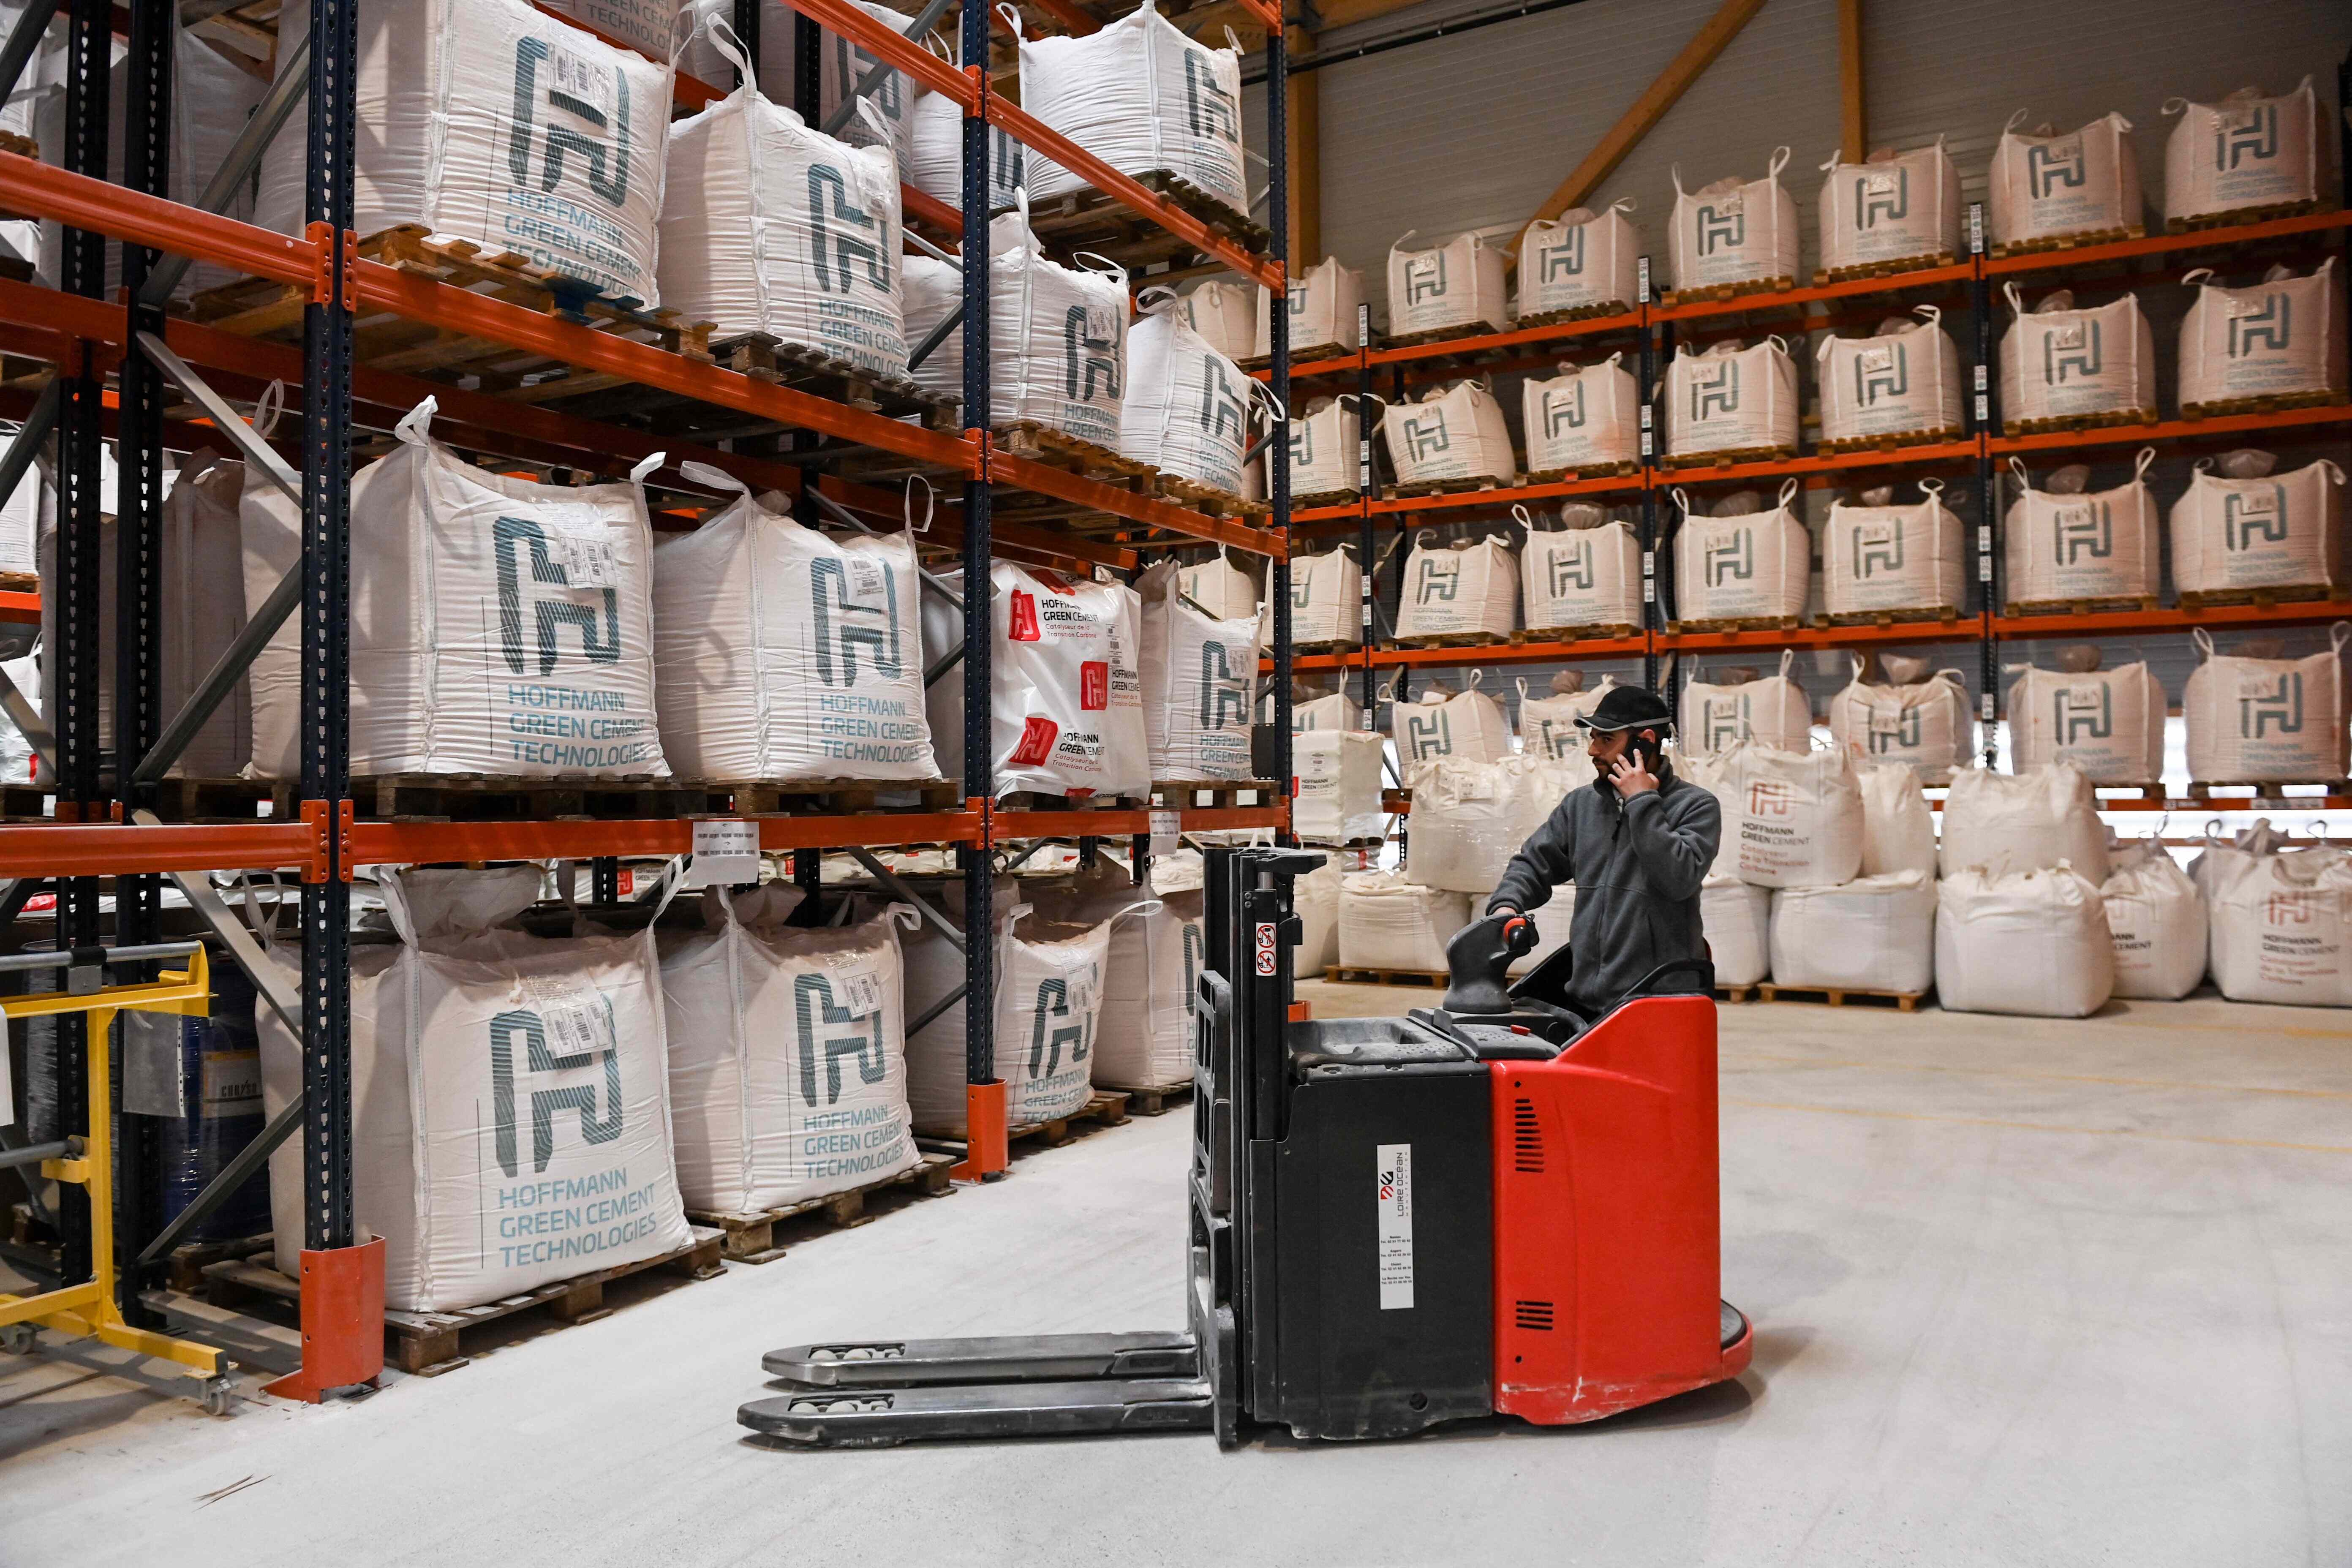 A Hoffmann Green Cement Technologies worker moves bags of cement with a forklift, in a storage room in the production site, in Bournezeau, western France.